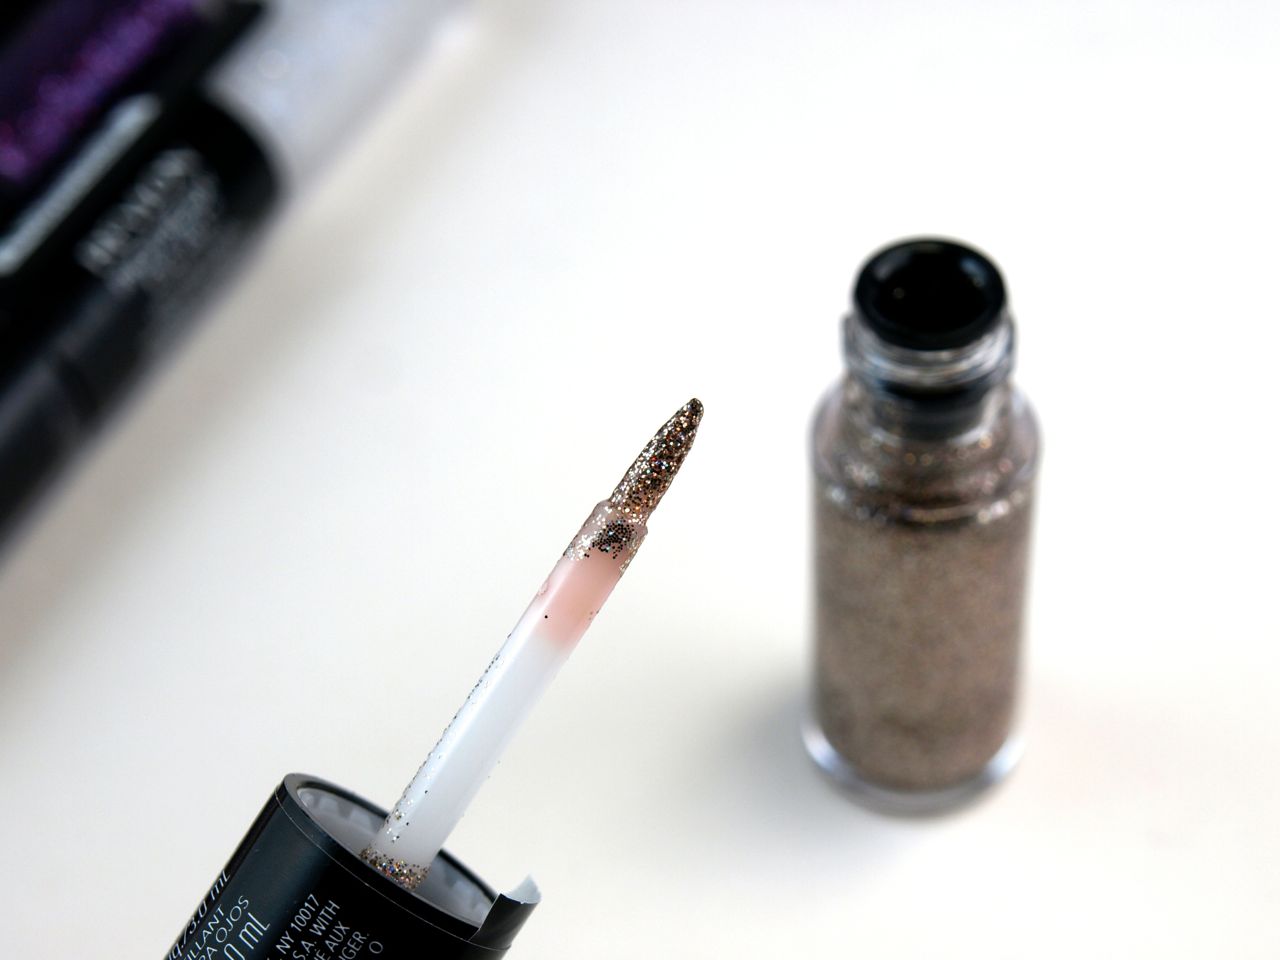 Revlon Photoready Eye Art Lid + Line + Lash: Review and Swatches